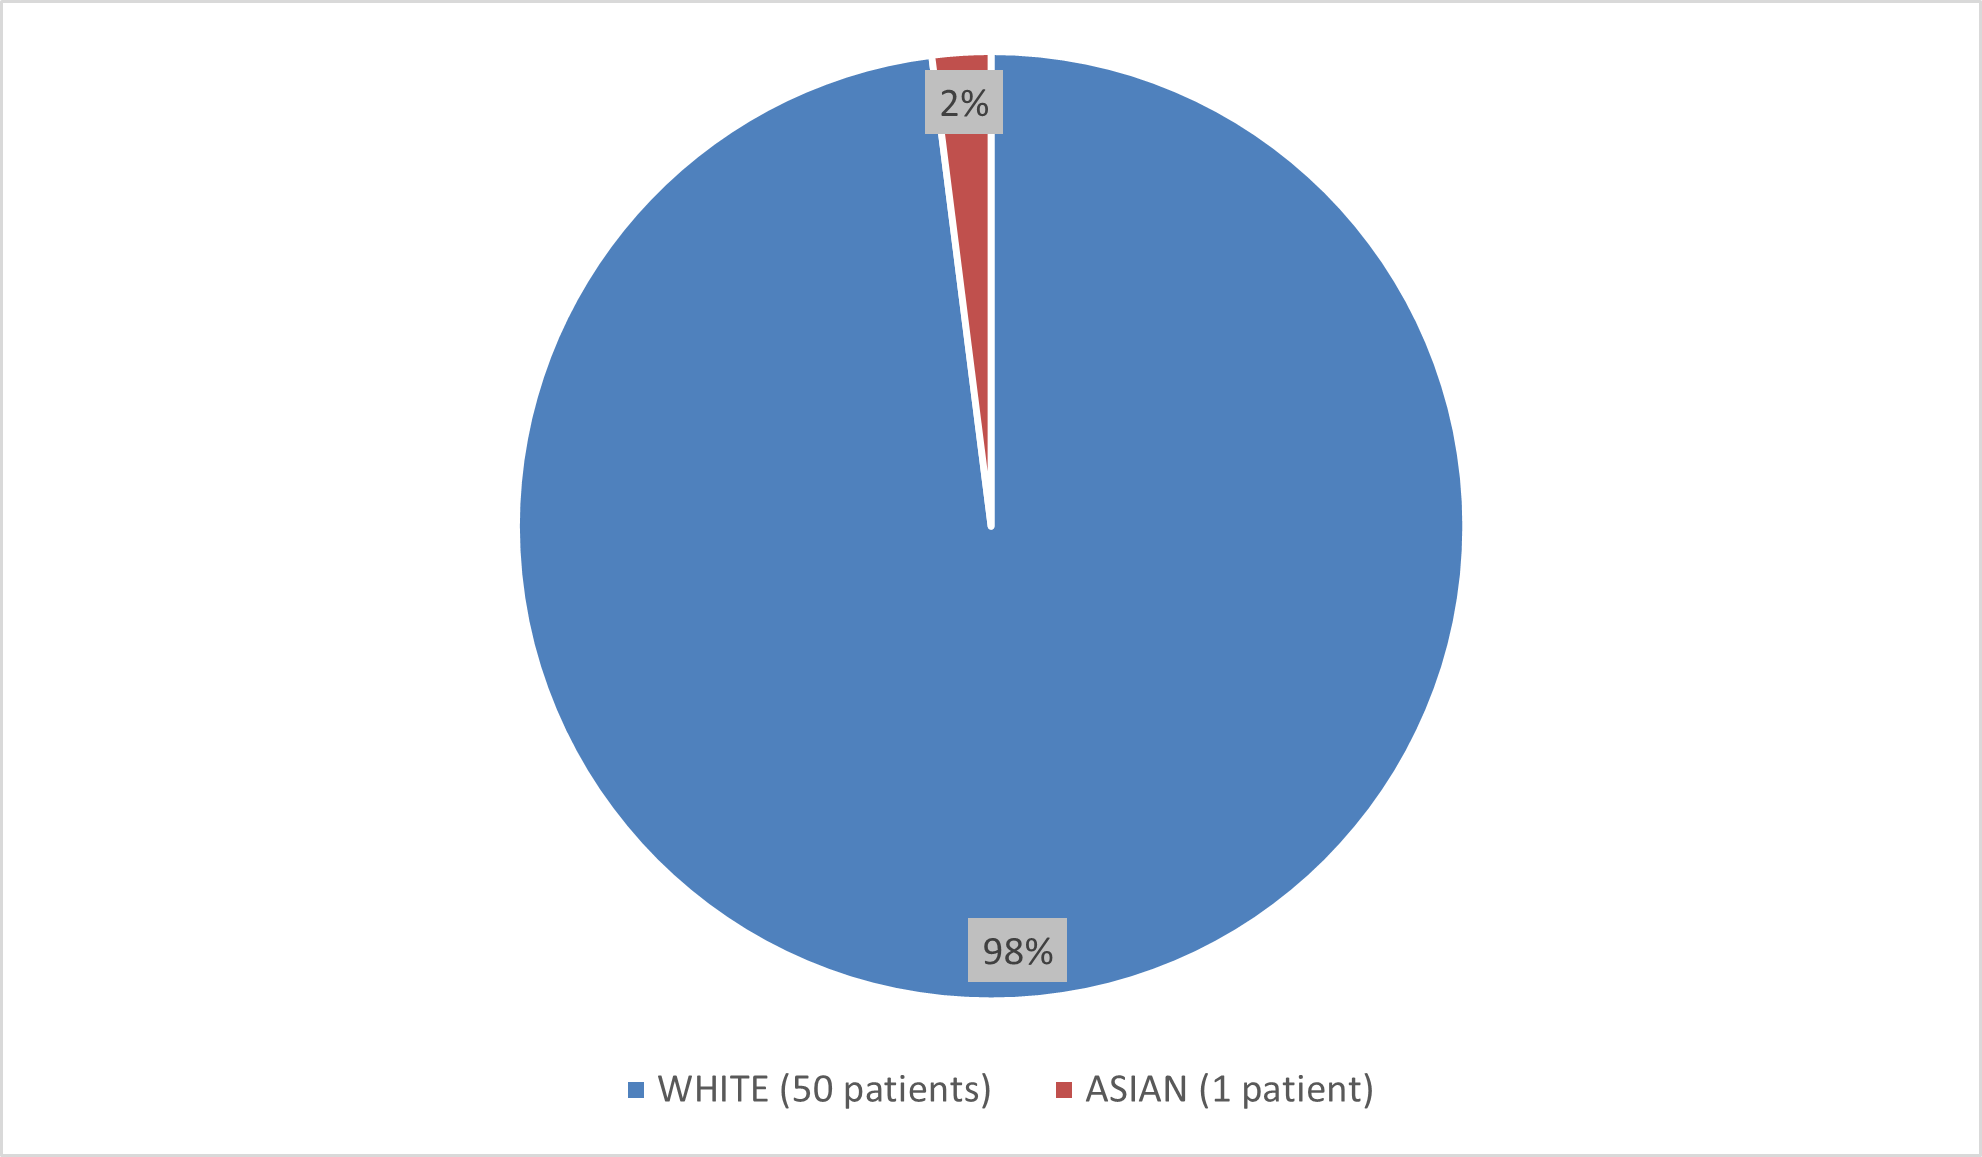 Pie chart summarizing how many White, Black, Asian, and other patients were in the clinical trial. In total, 50 (98%) White patients and 1 (2%) Asian patients participated in the clinical trial.